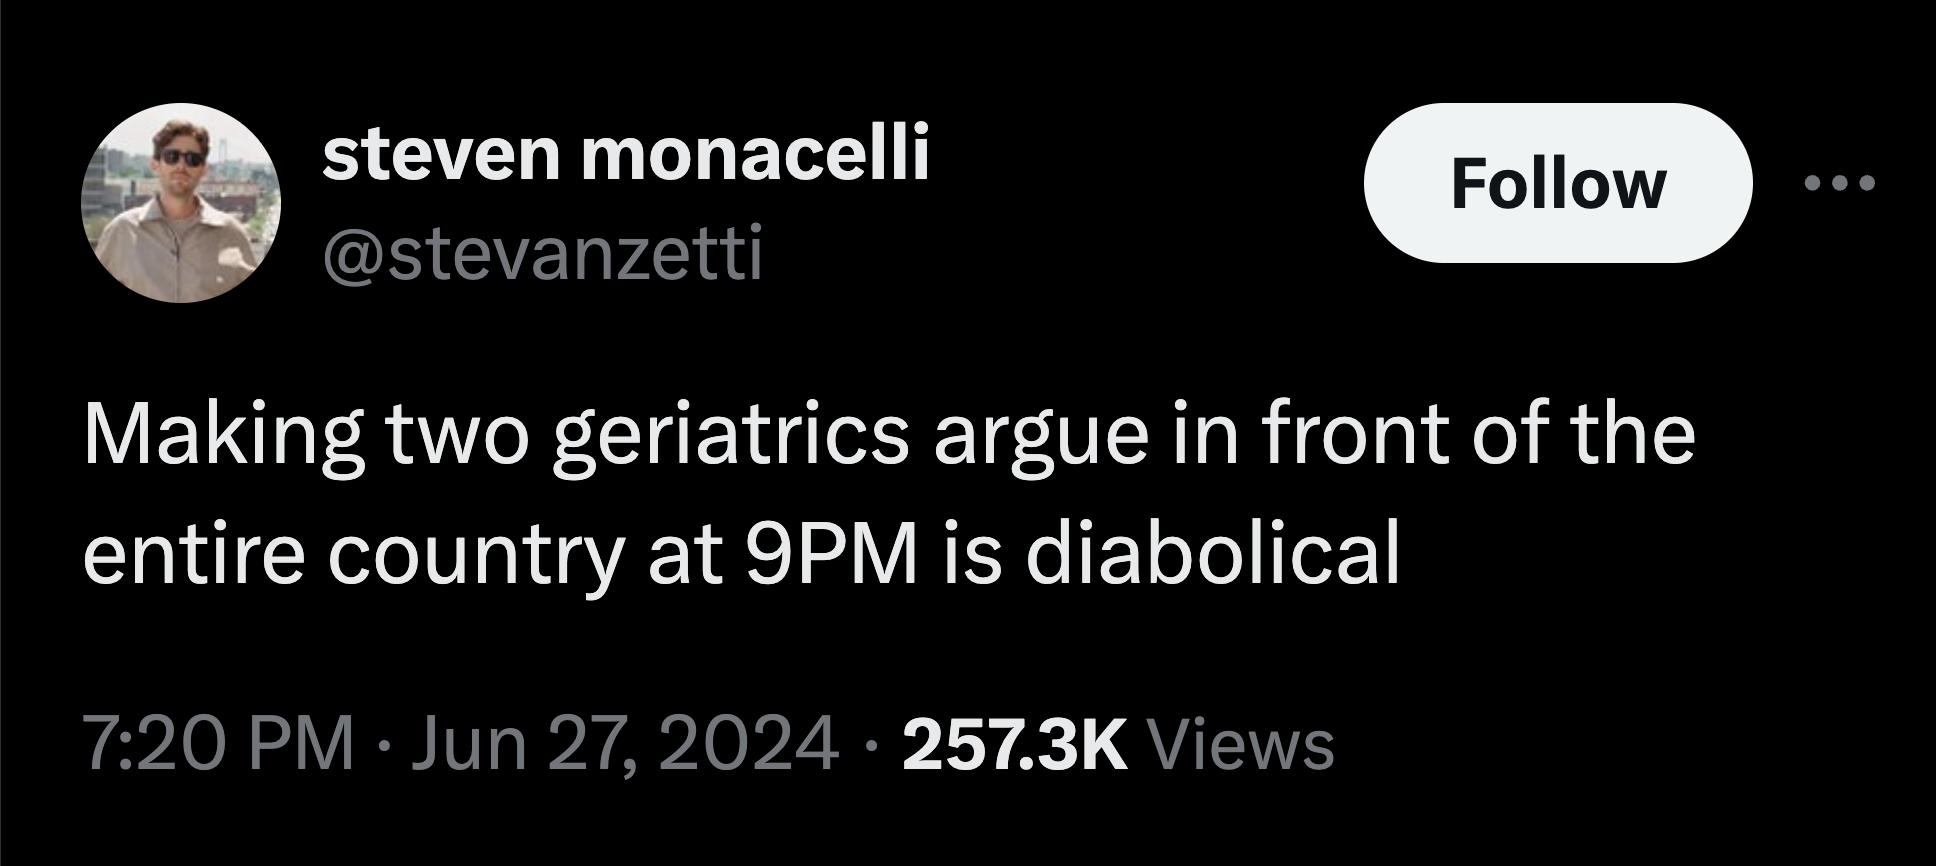 circle - steven monacelli Making two geriatrics argue in front of the entire country at 9PM is diabolical Views